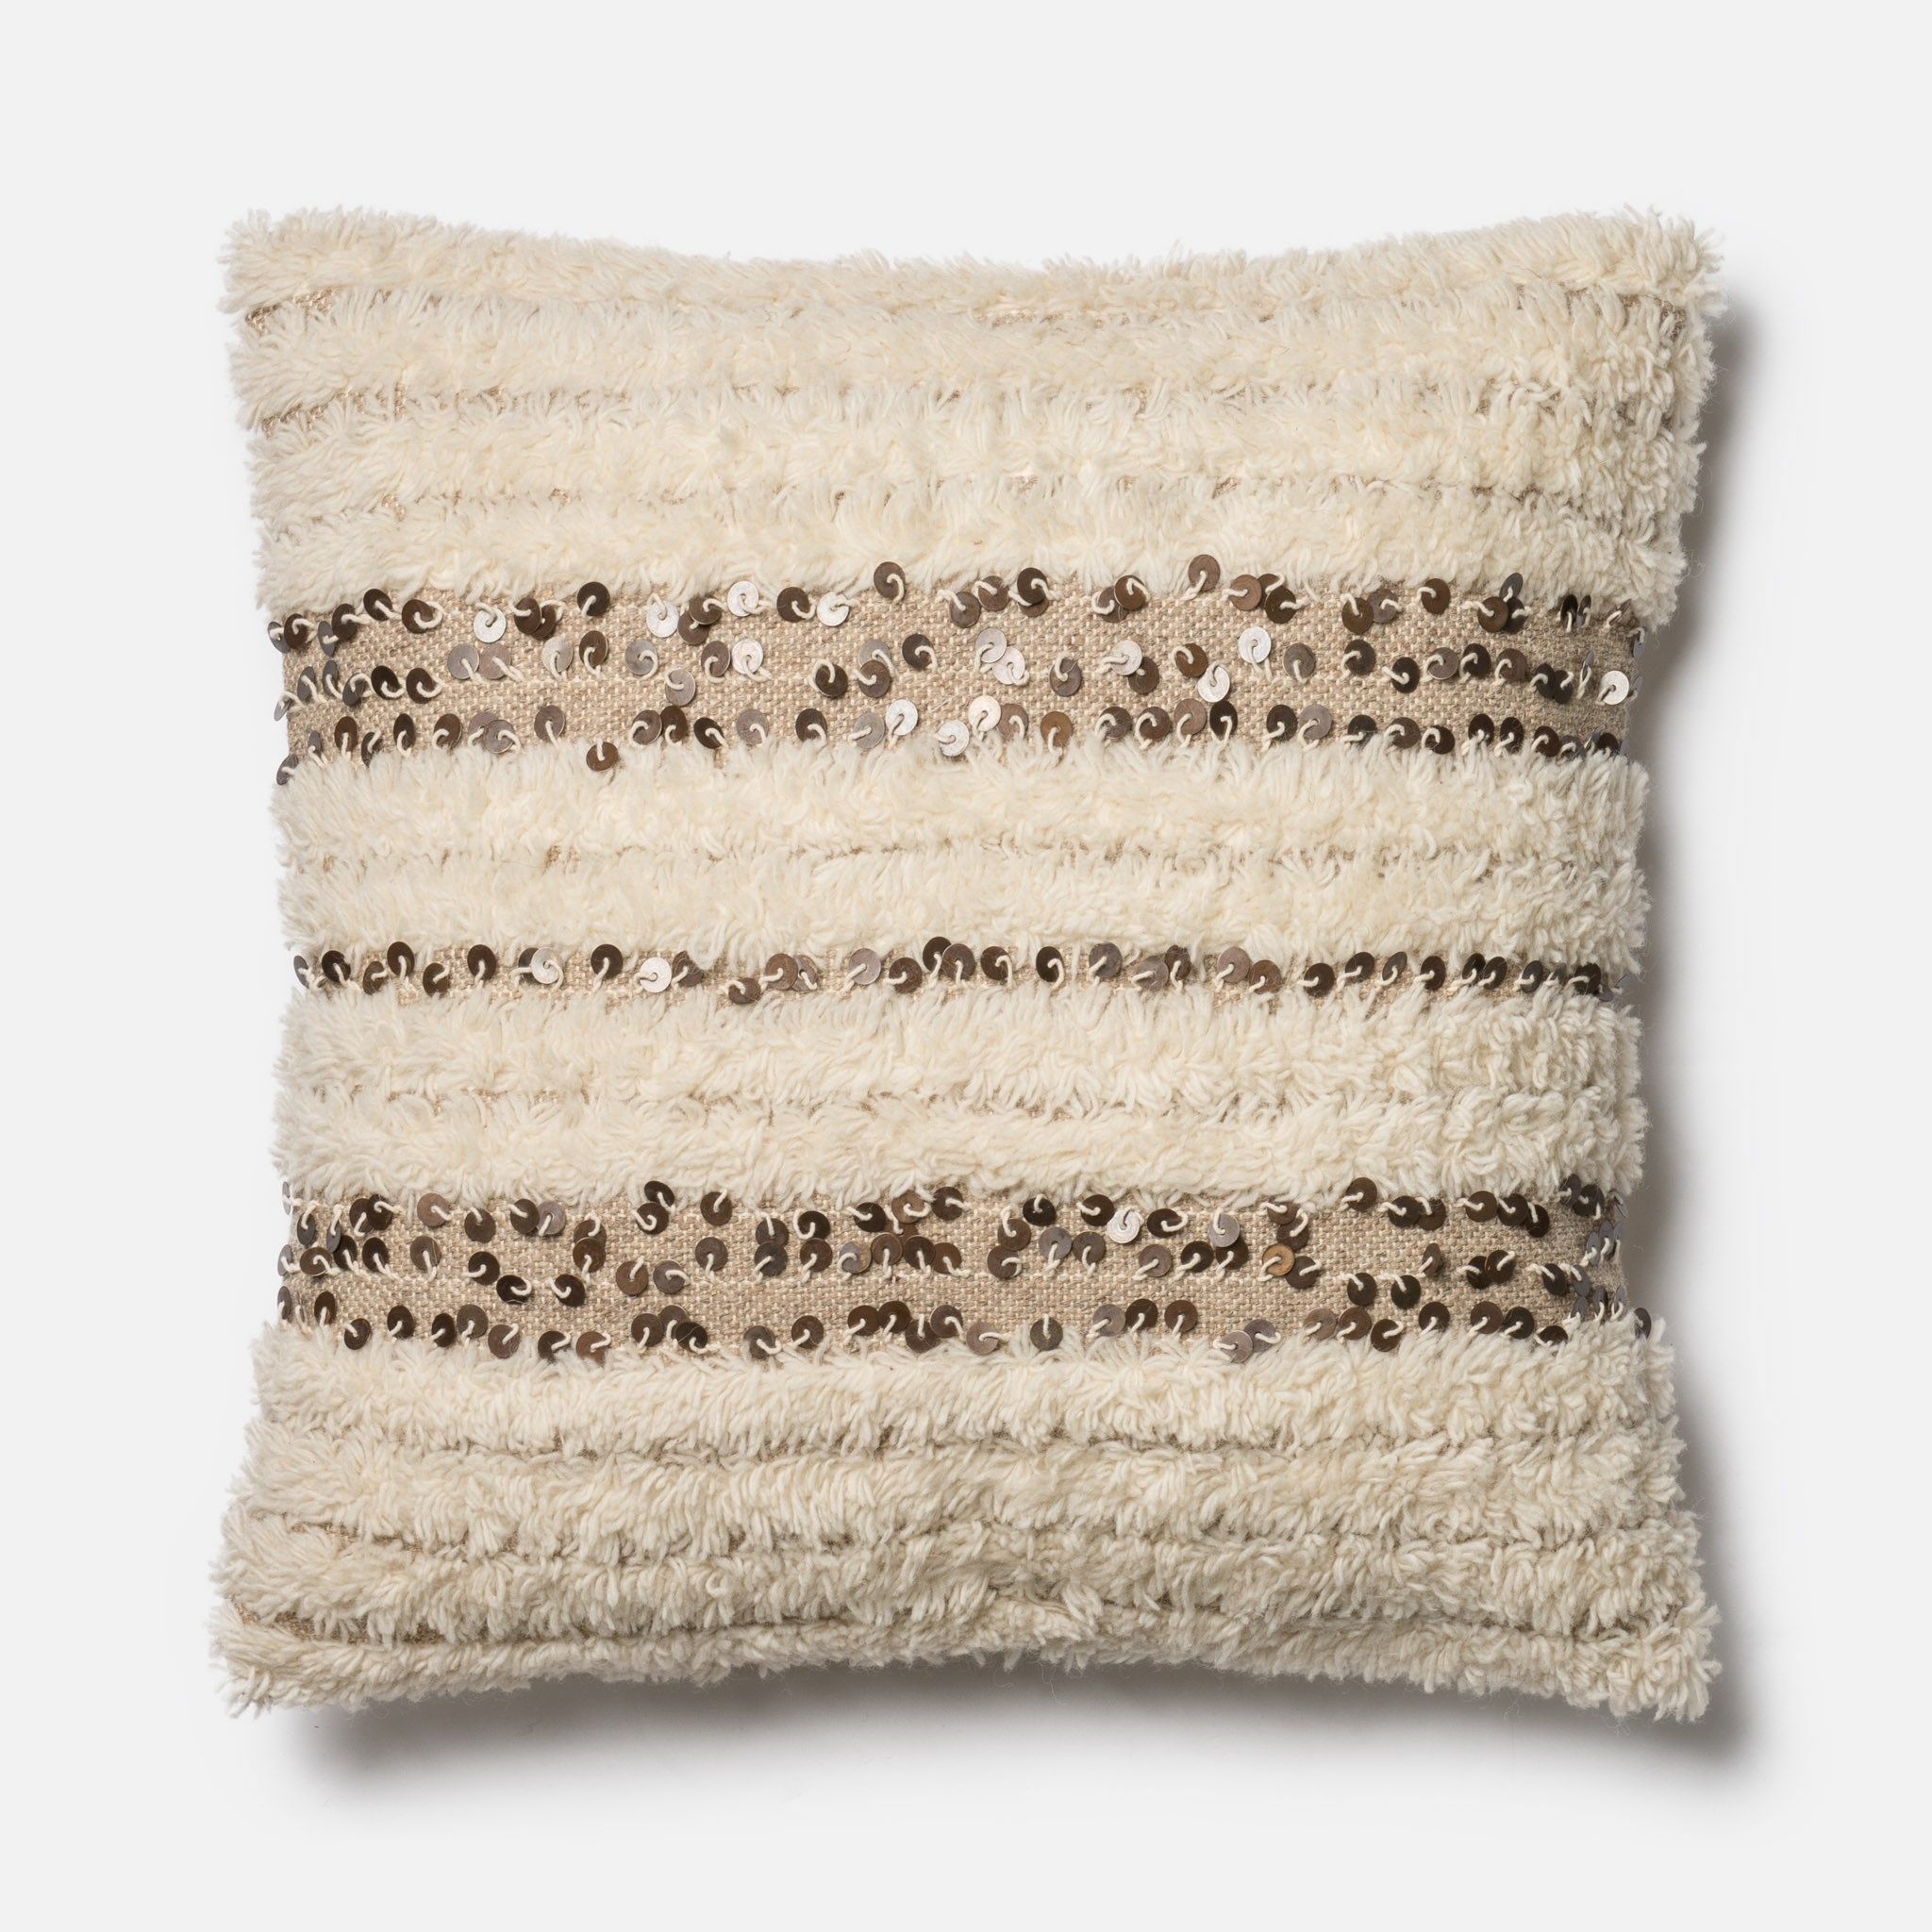 Wool & Sequin Pillow, Ivory & Gold, 22" x 22" - Image 0